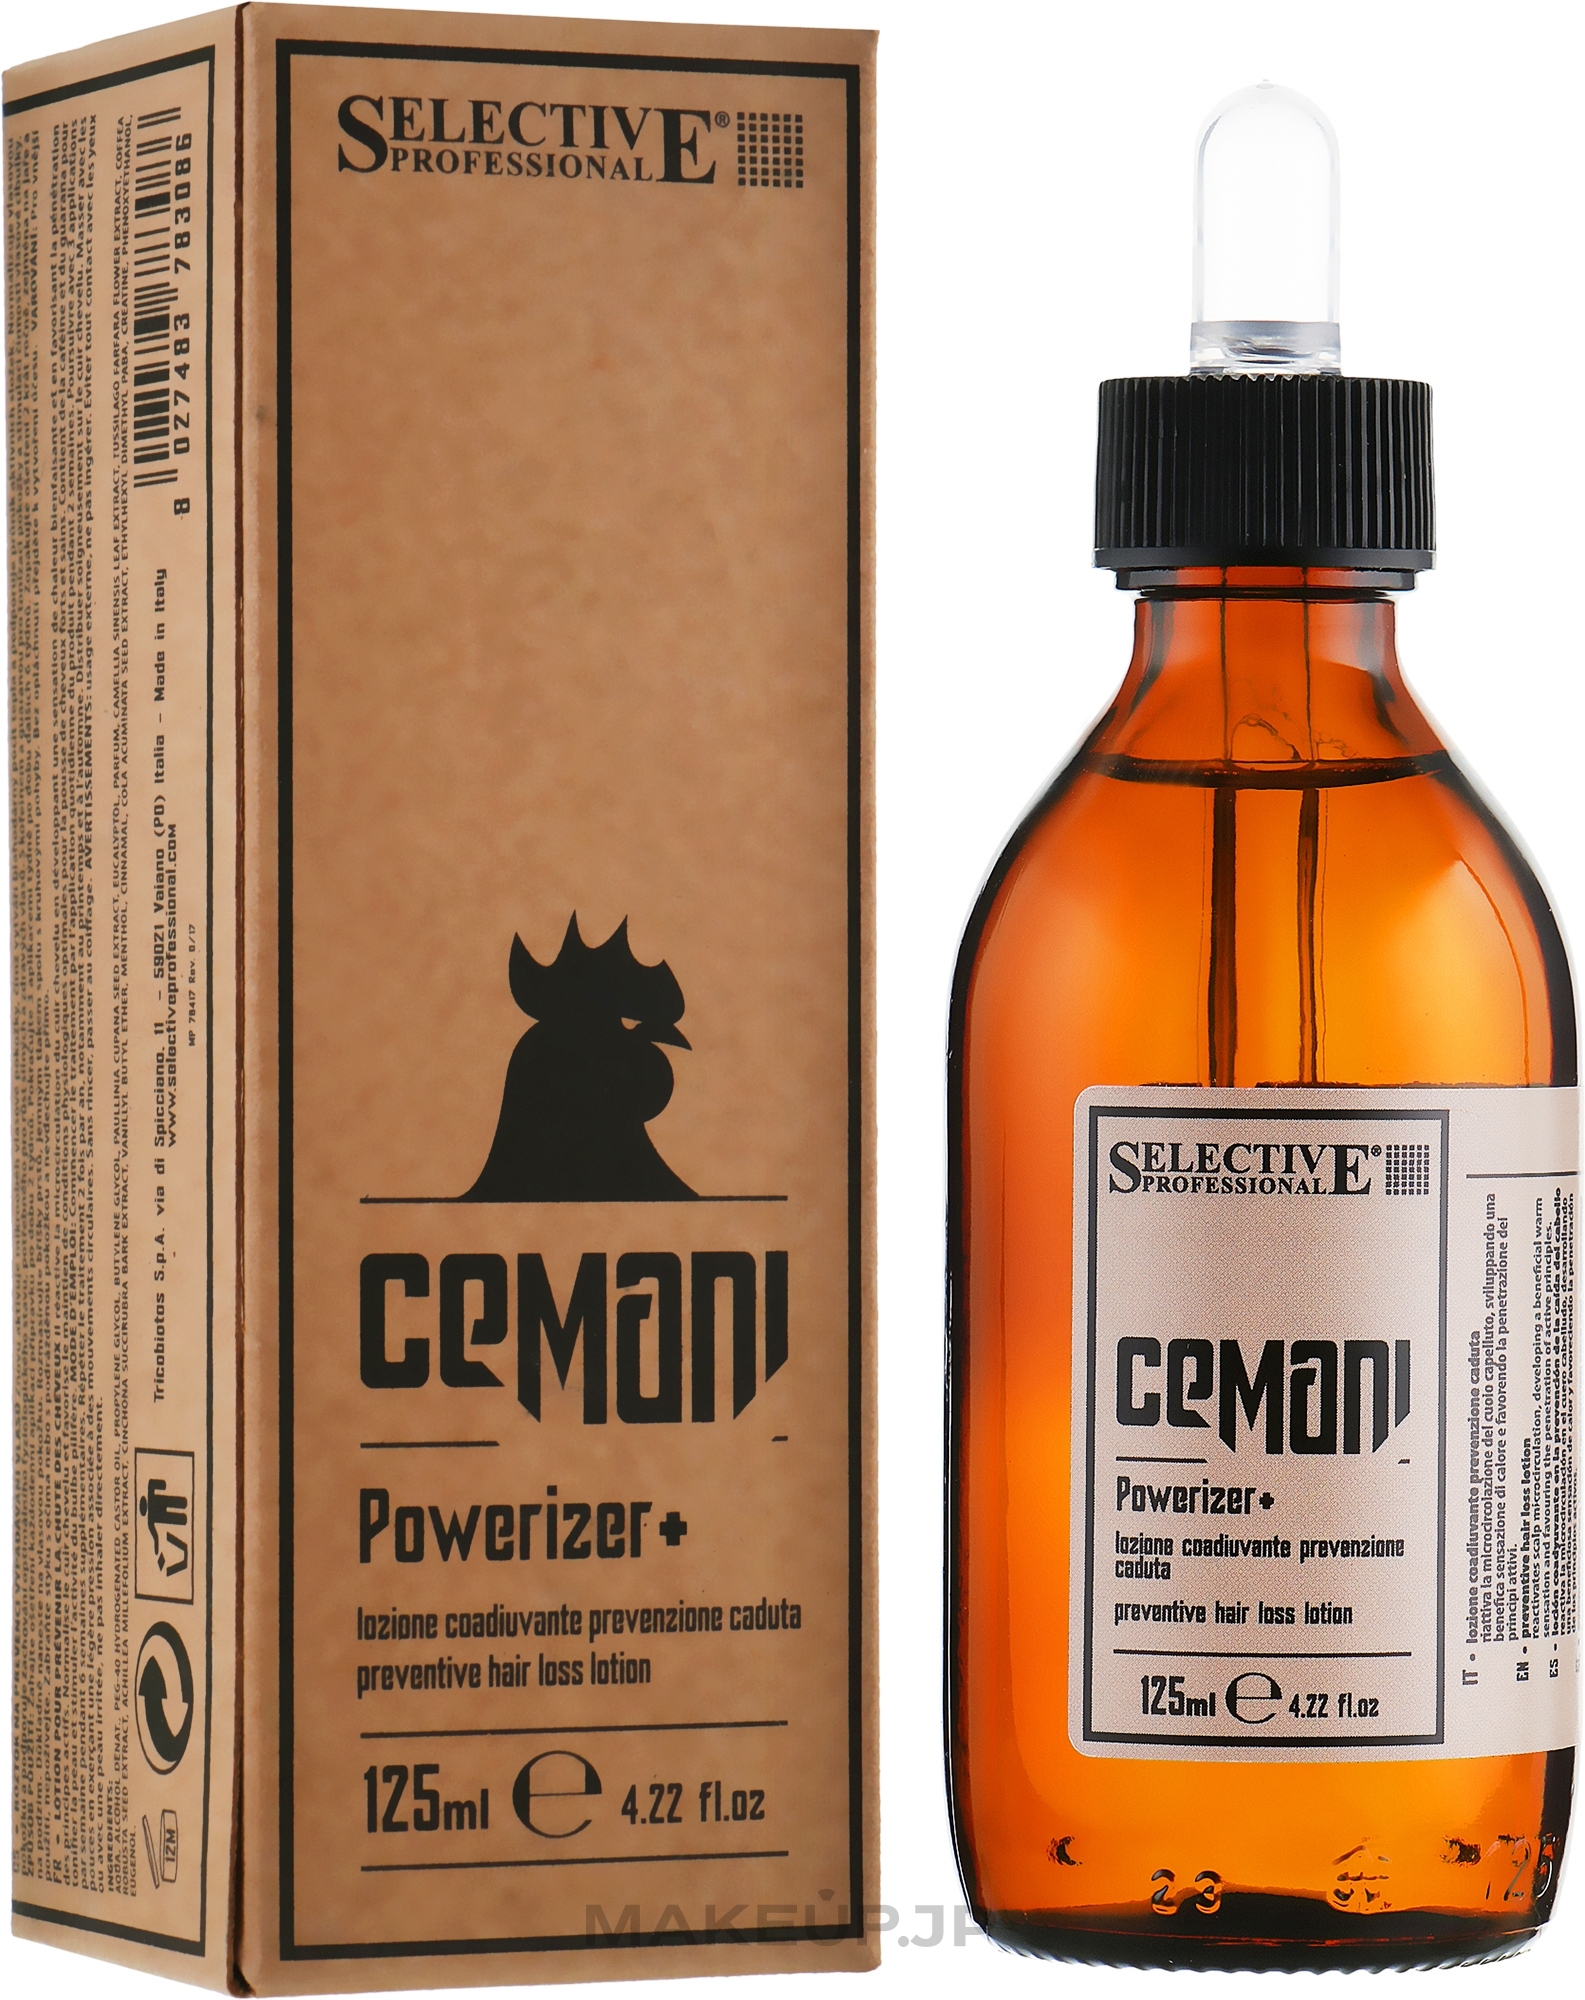 Hair Loss Prevention Lotion - Selective Cemani Powerizer Lotion — photo 125 ml